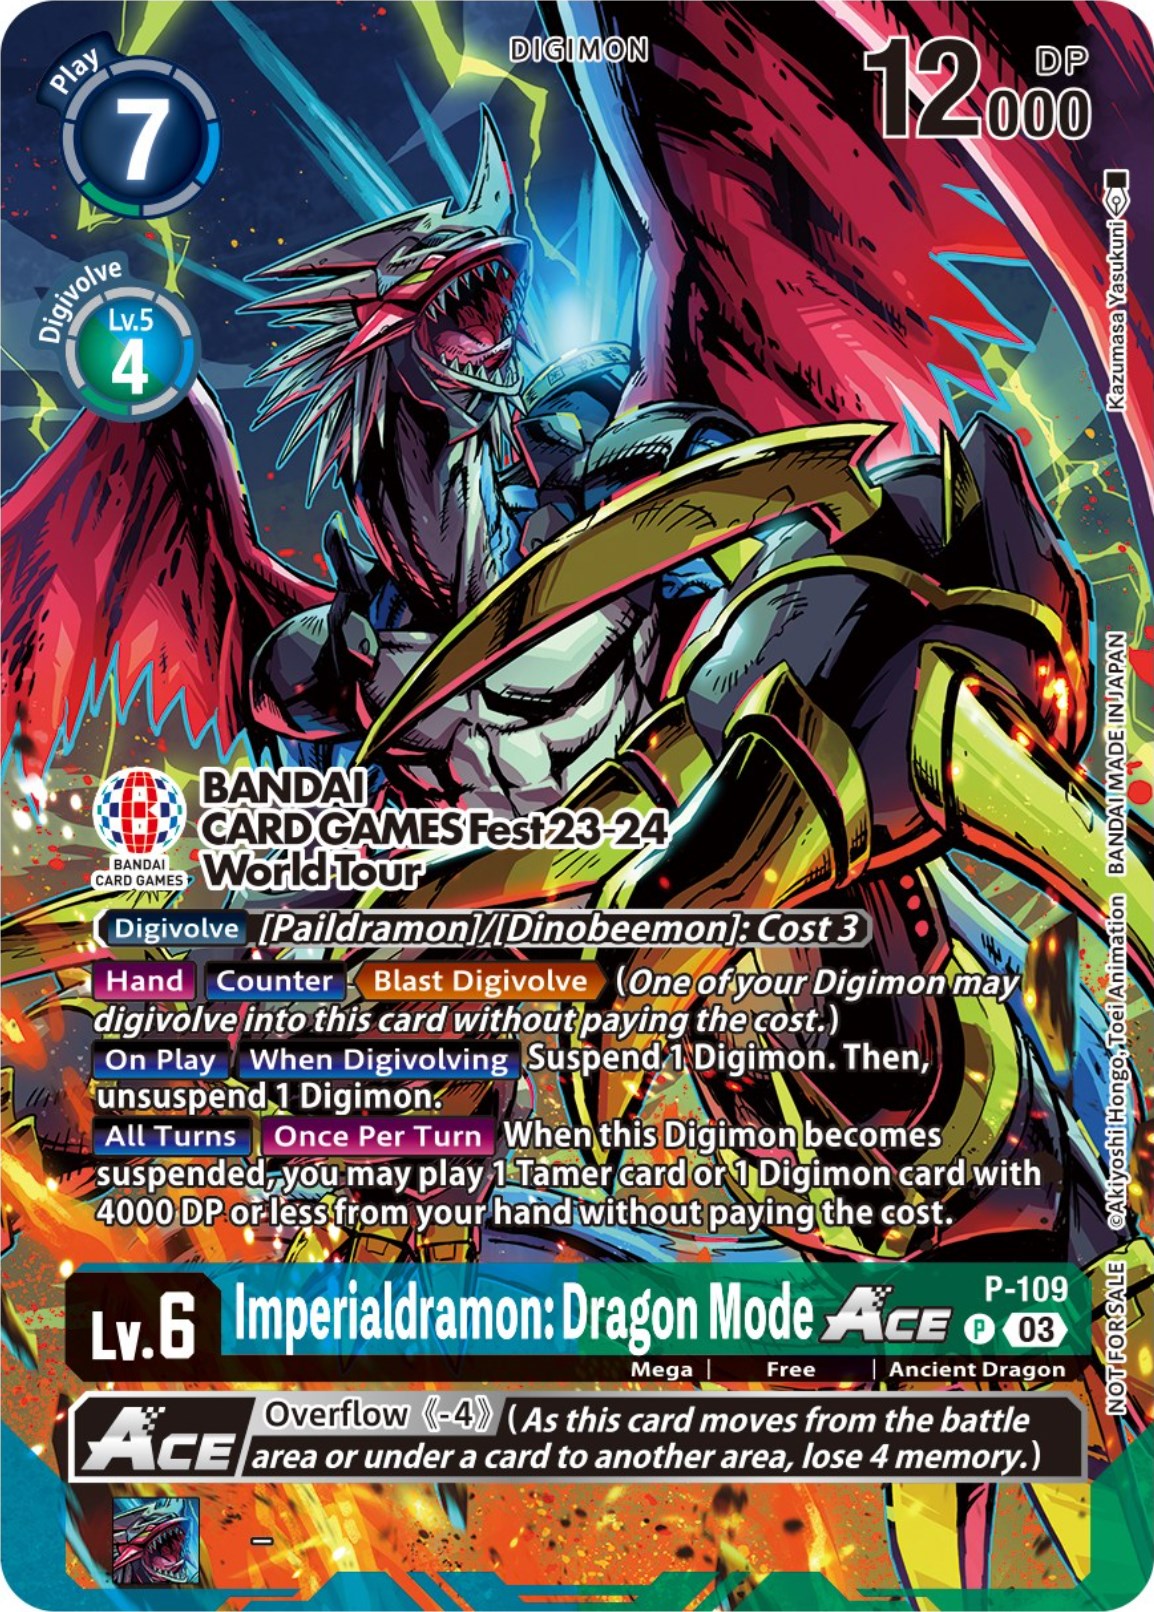 Imperialdramon: Dragon Mode Ace [P-109] (BANDAI Card Games Fest 23-24 World Tour) [Promotional Cards] | Red Riot Games CA